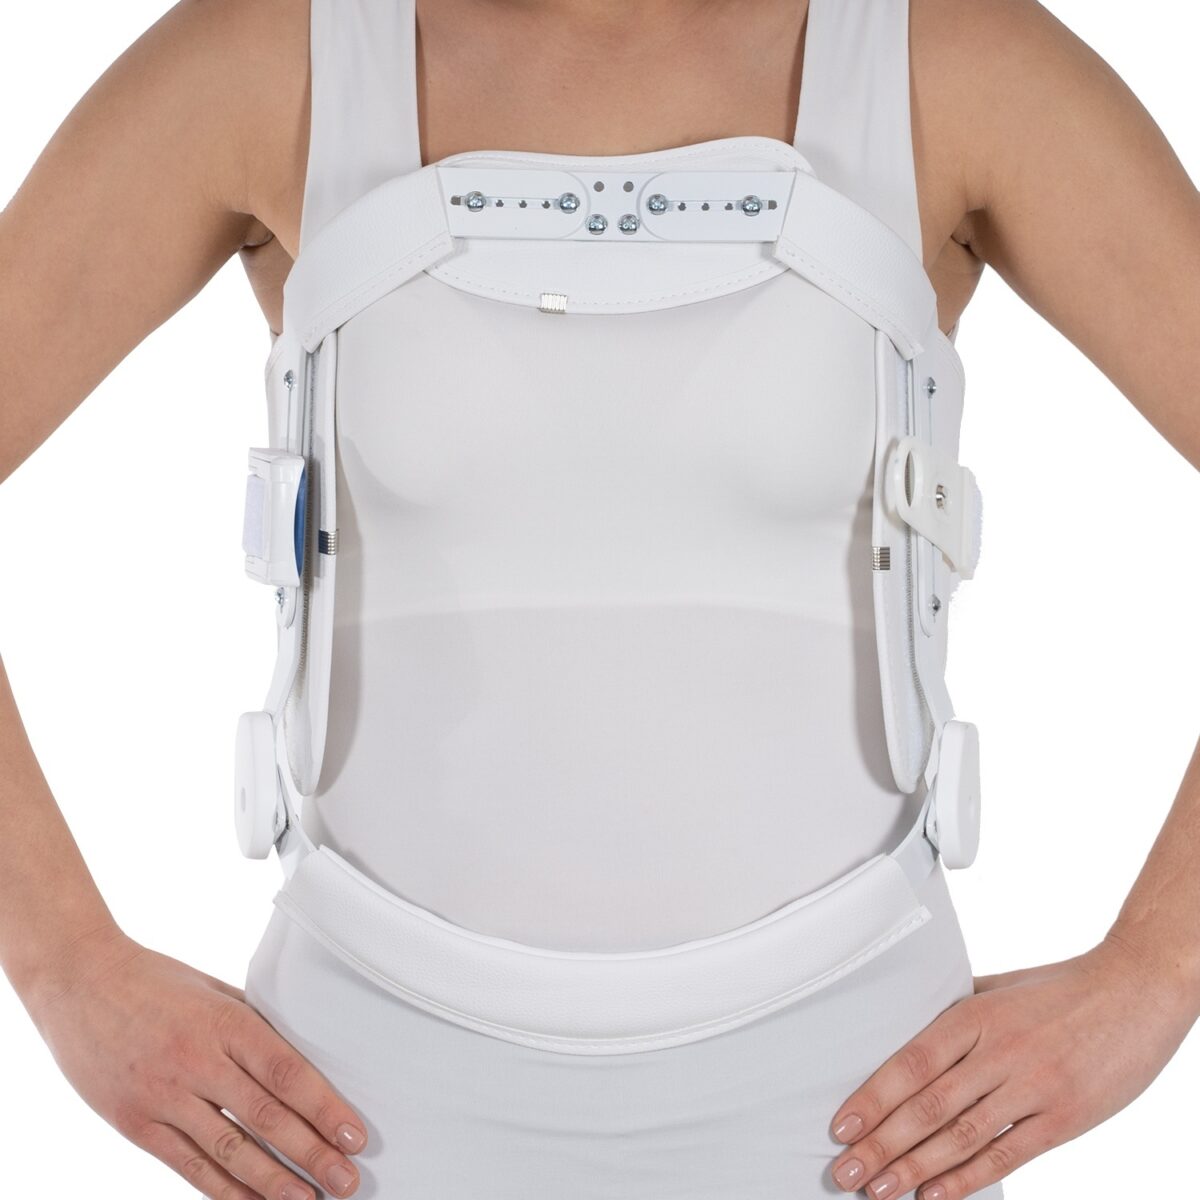 wingmed orthopedic equipments W431 dynamic hiperextension corset 55